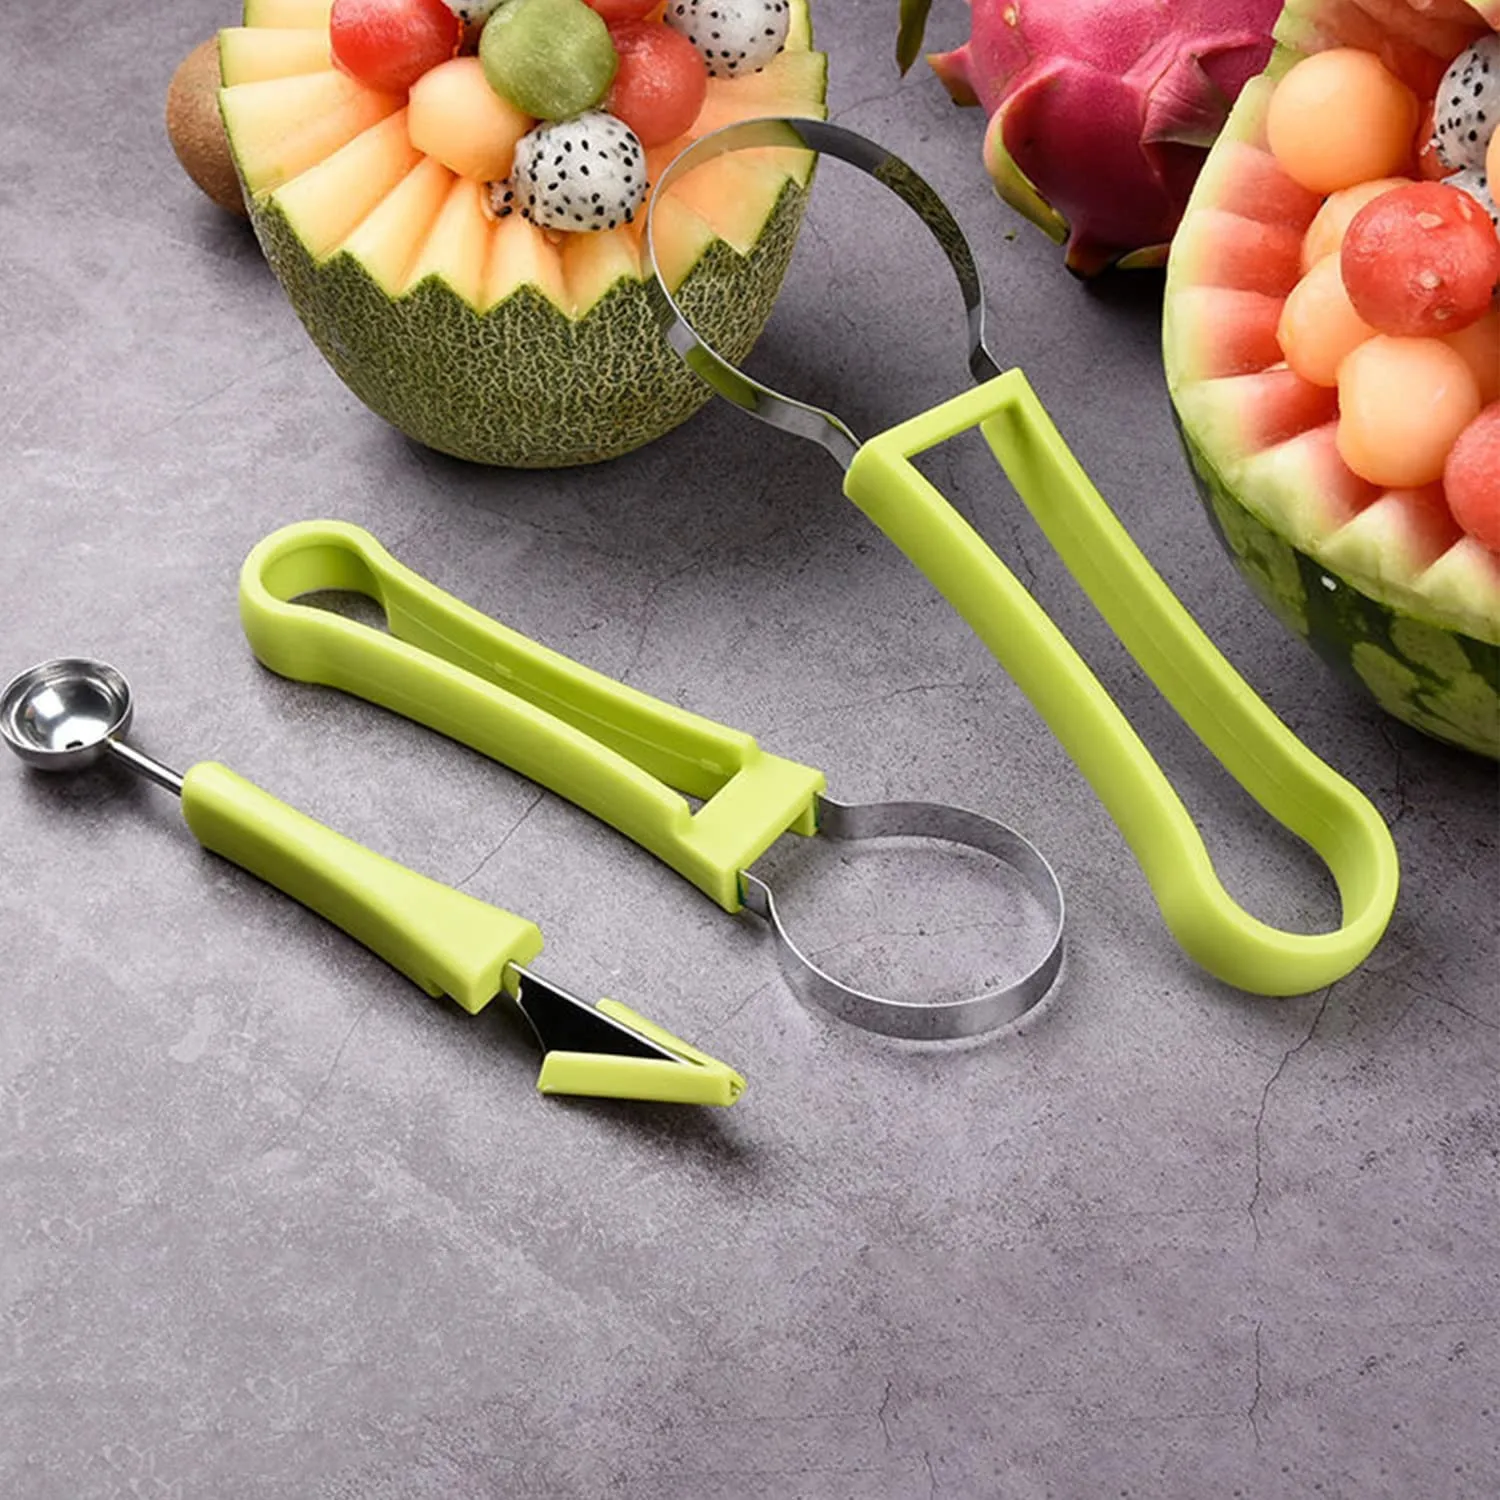 Fruit Tool Set Fruit Carving, Fruit Scoop Watermelon Ball Cutter Food Cantaloupe Peeler, Used for Fruit Decoration Kitchen Fruit